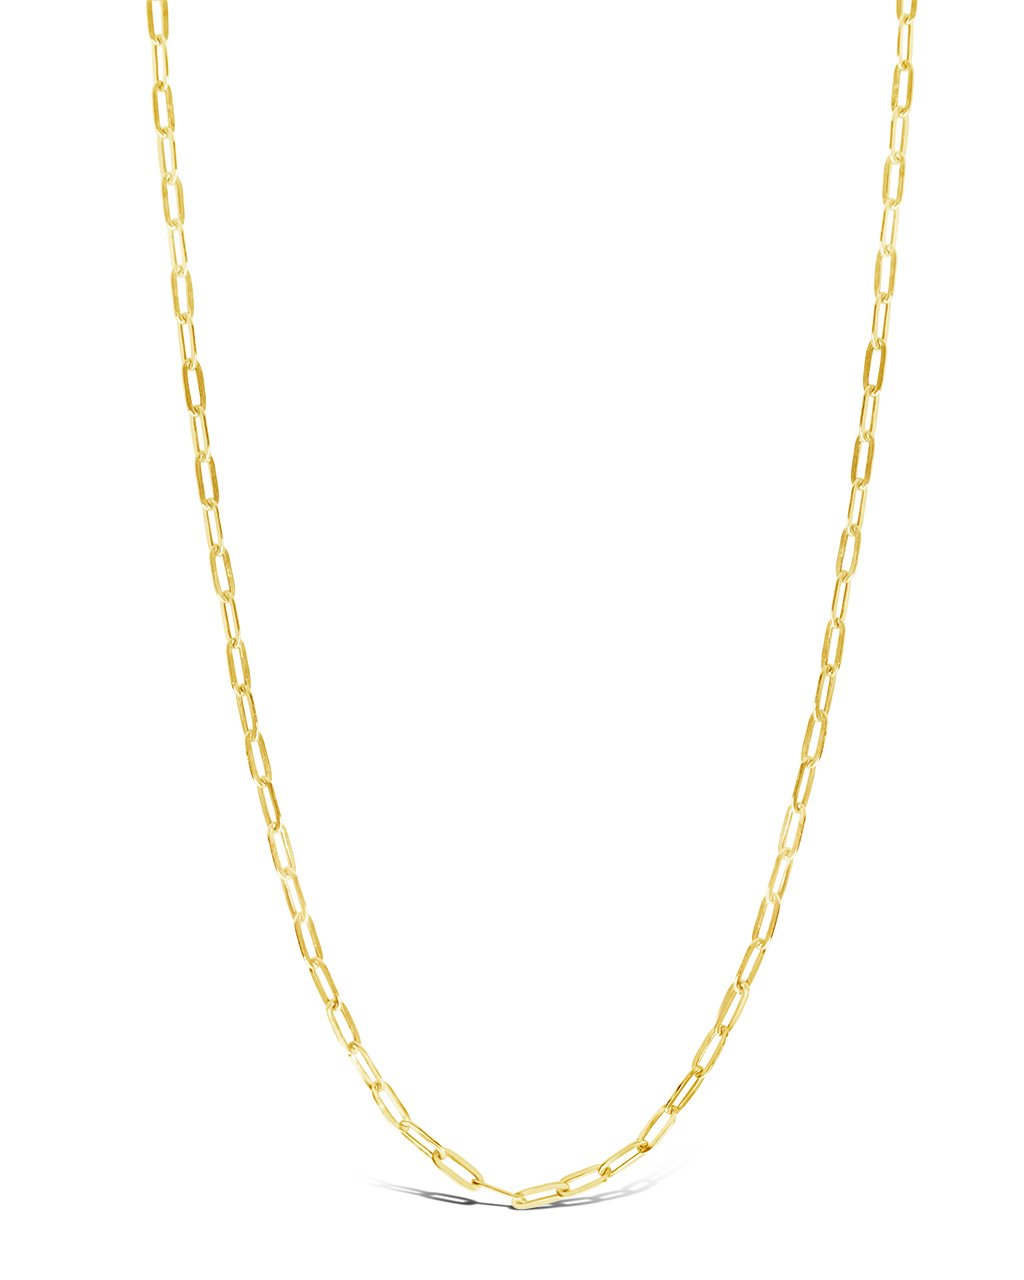 MAI Désirée Ricky Gold Paperclip Chain Set - Waterproof Jewelry